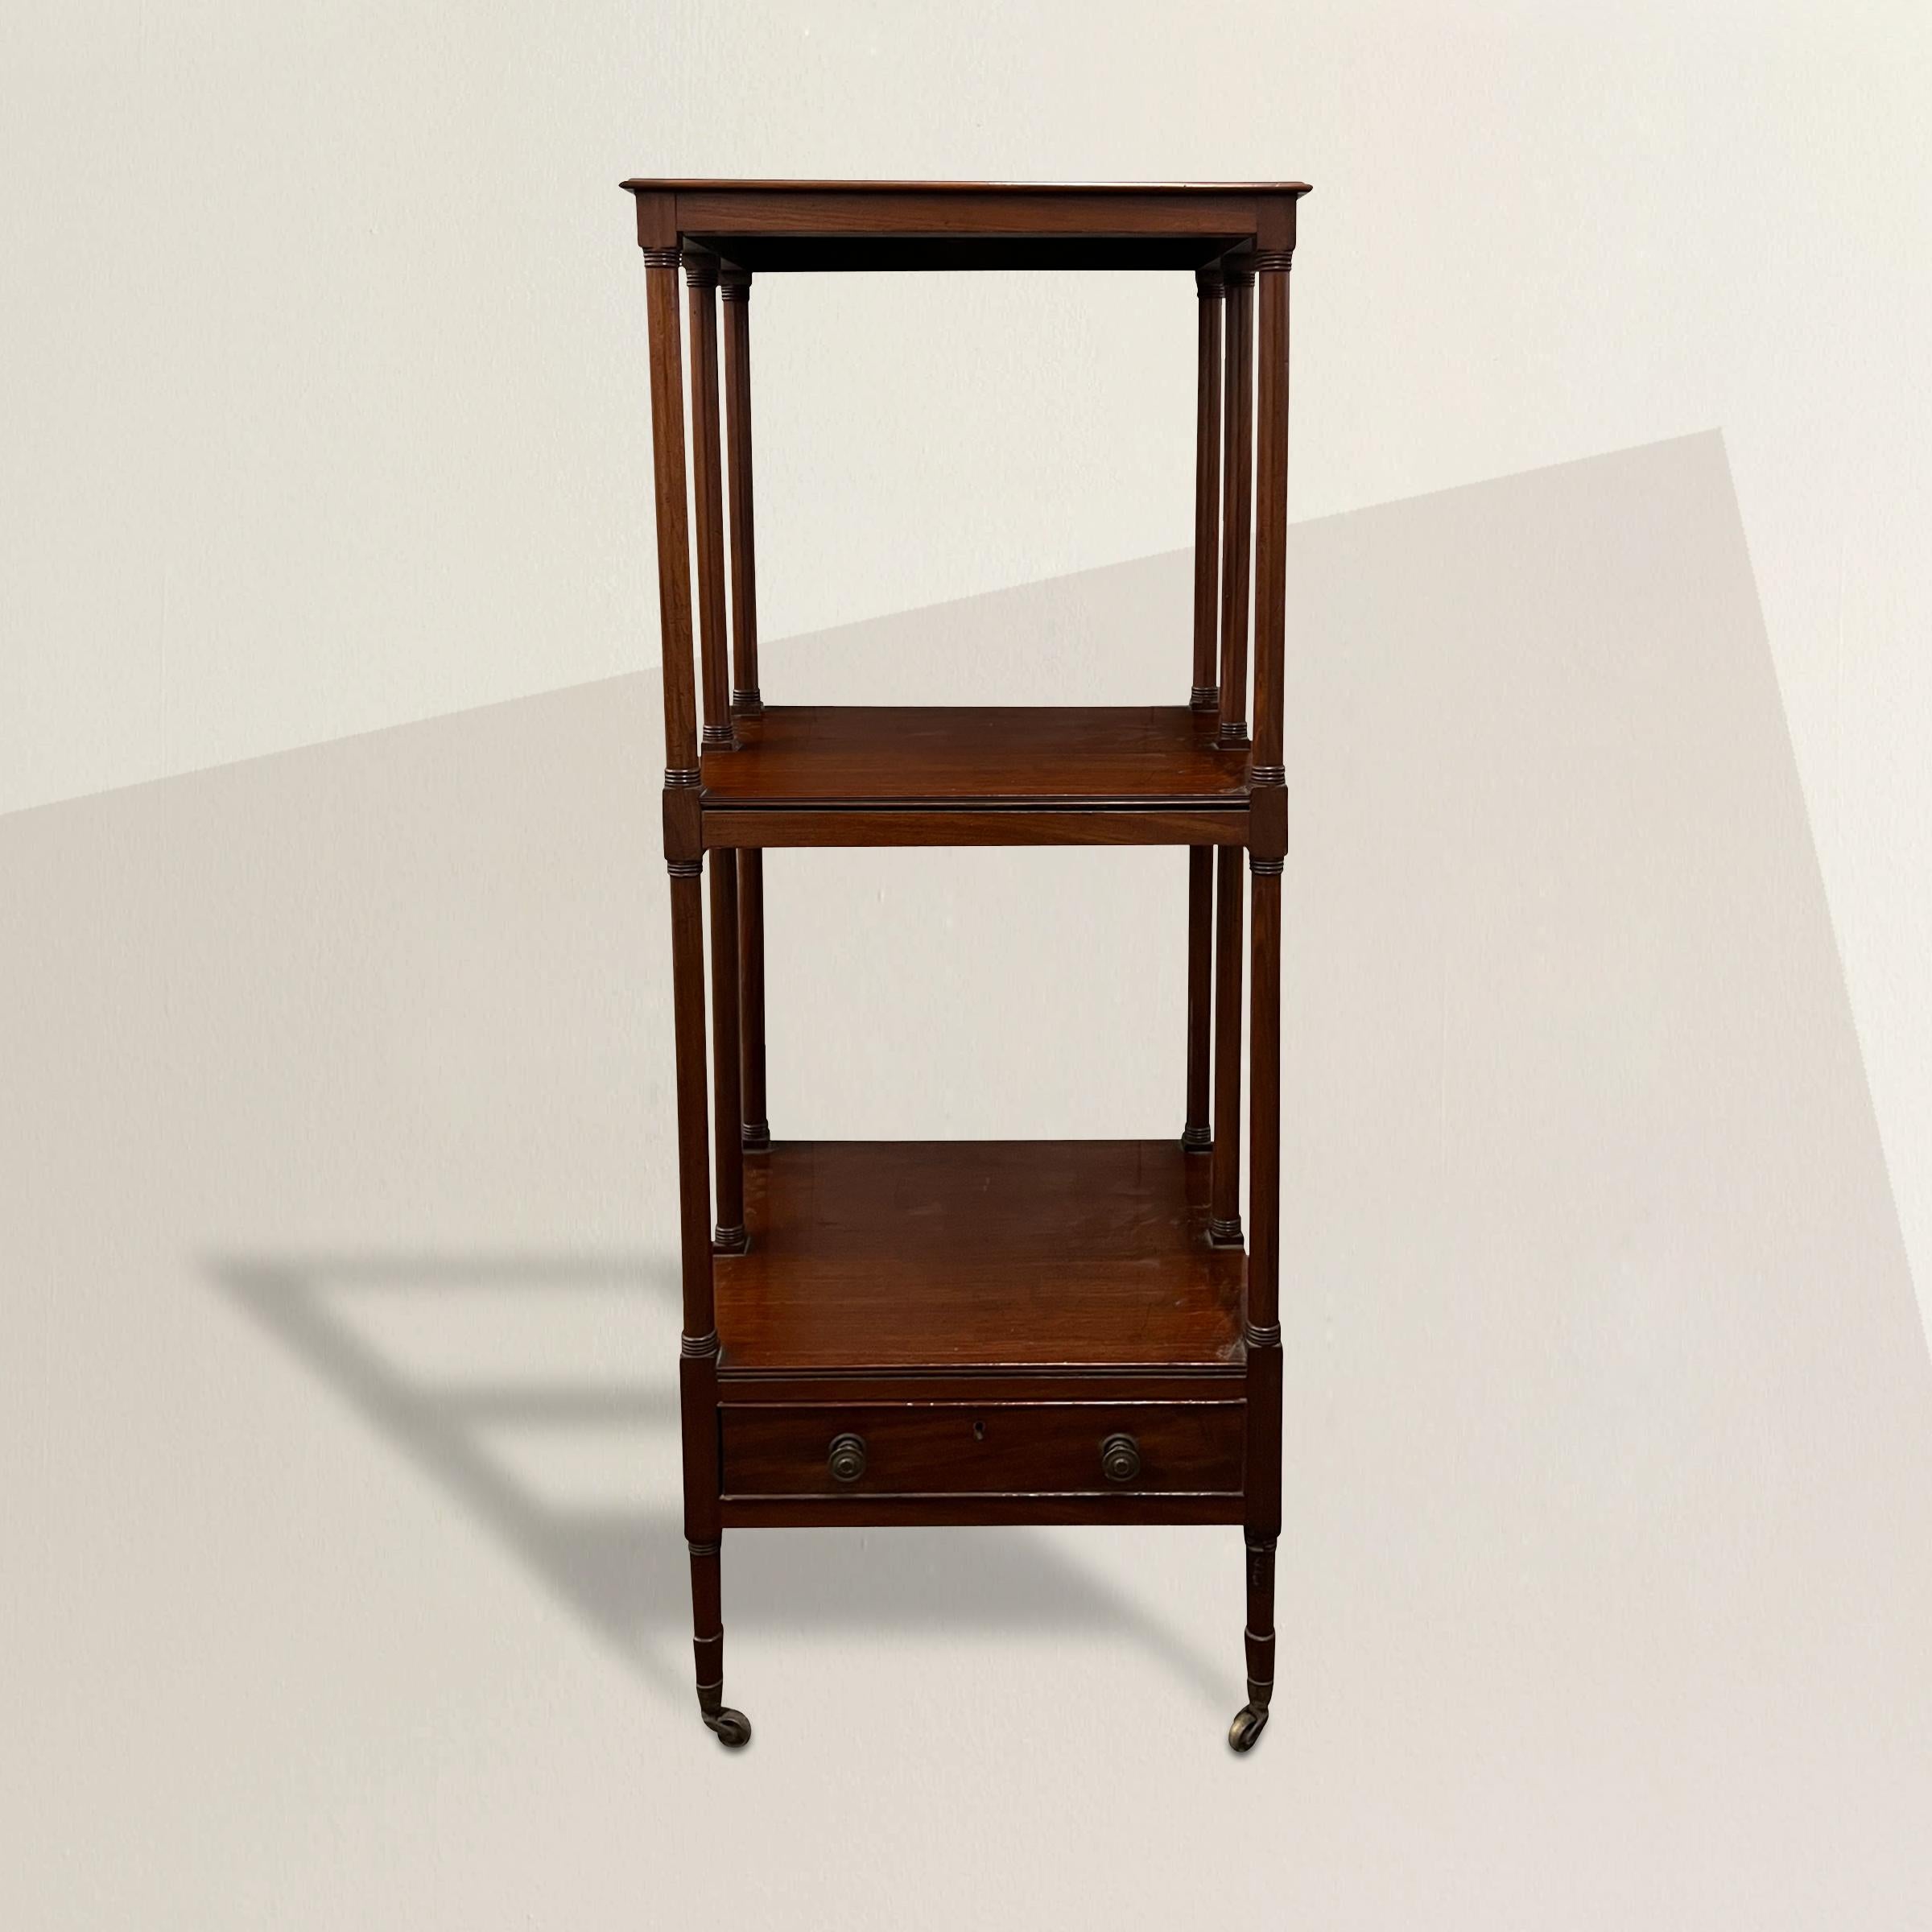 A fantastic late 19th century English mahogany whatnot, or tired stand, with beautifully turned supports mimicking columns, two shelves, and a lower drawer with two brass knobs. Whatnots were originally used to display Victorian curios, or whatnots,